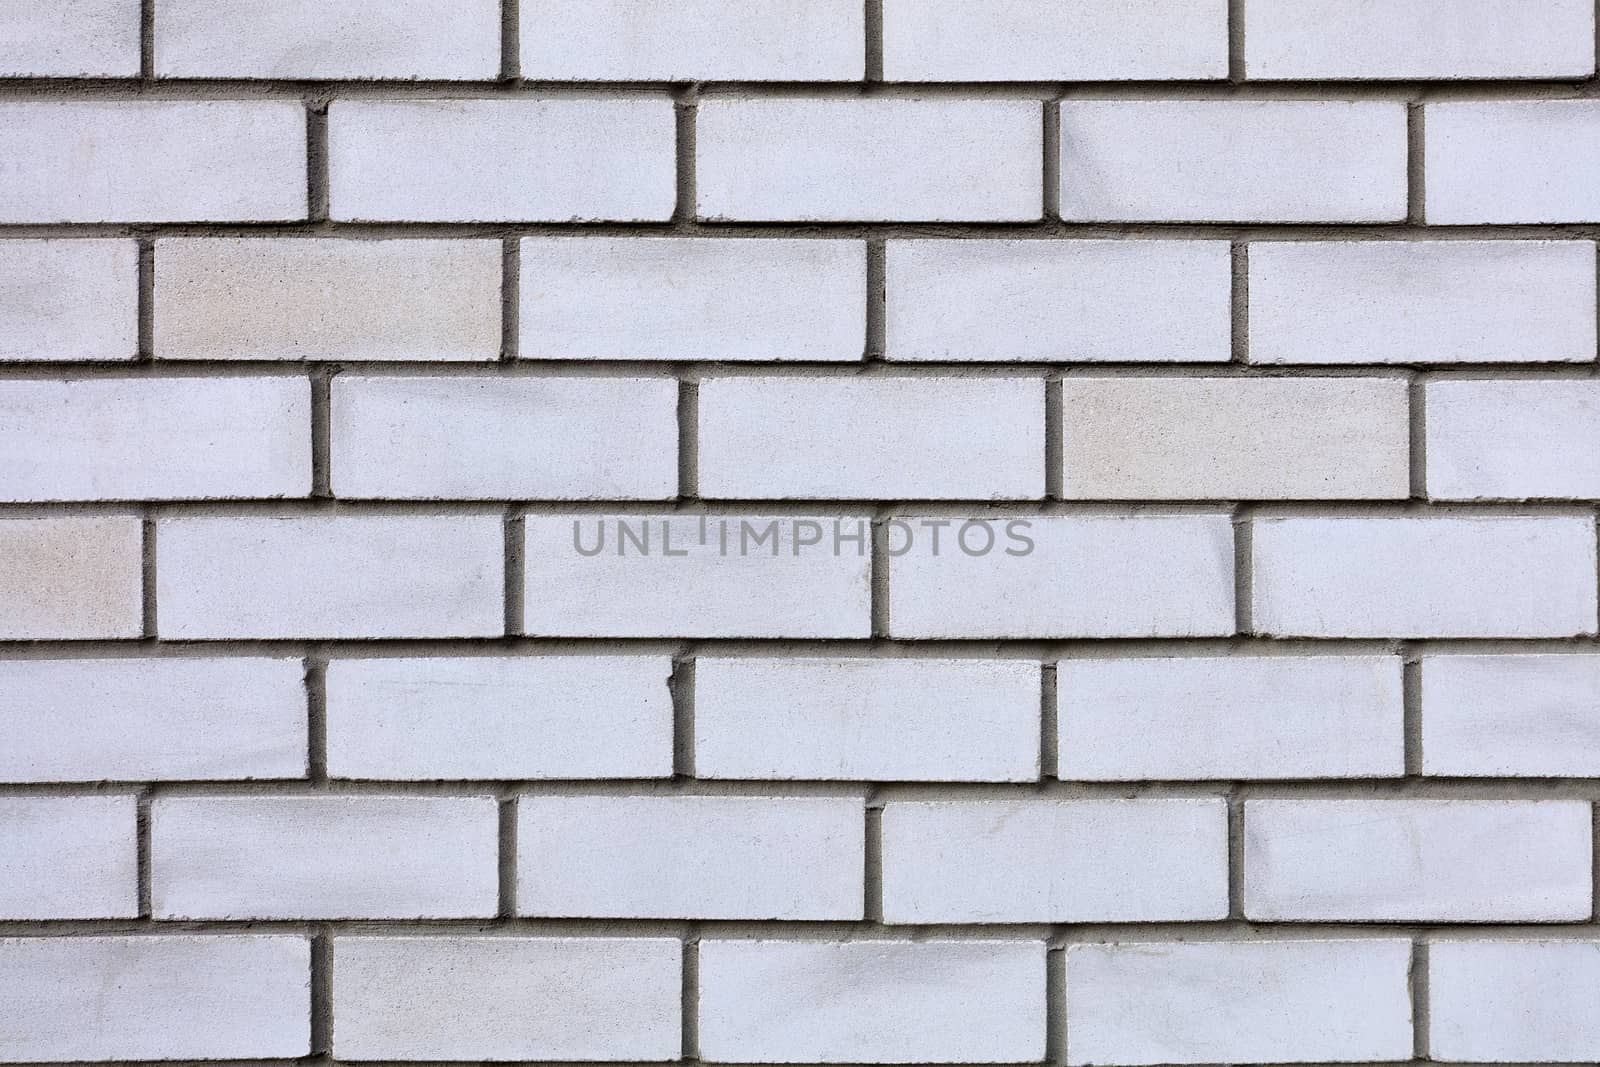 The texture of the wall is made of gray and white bricks laid horizontally.